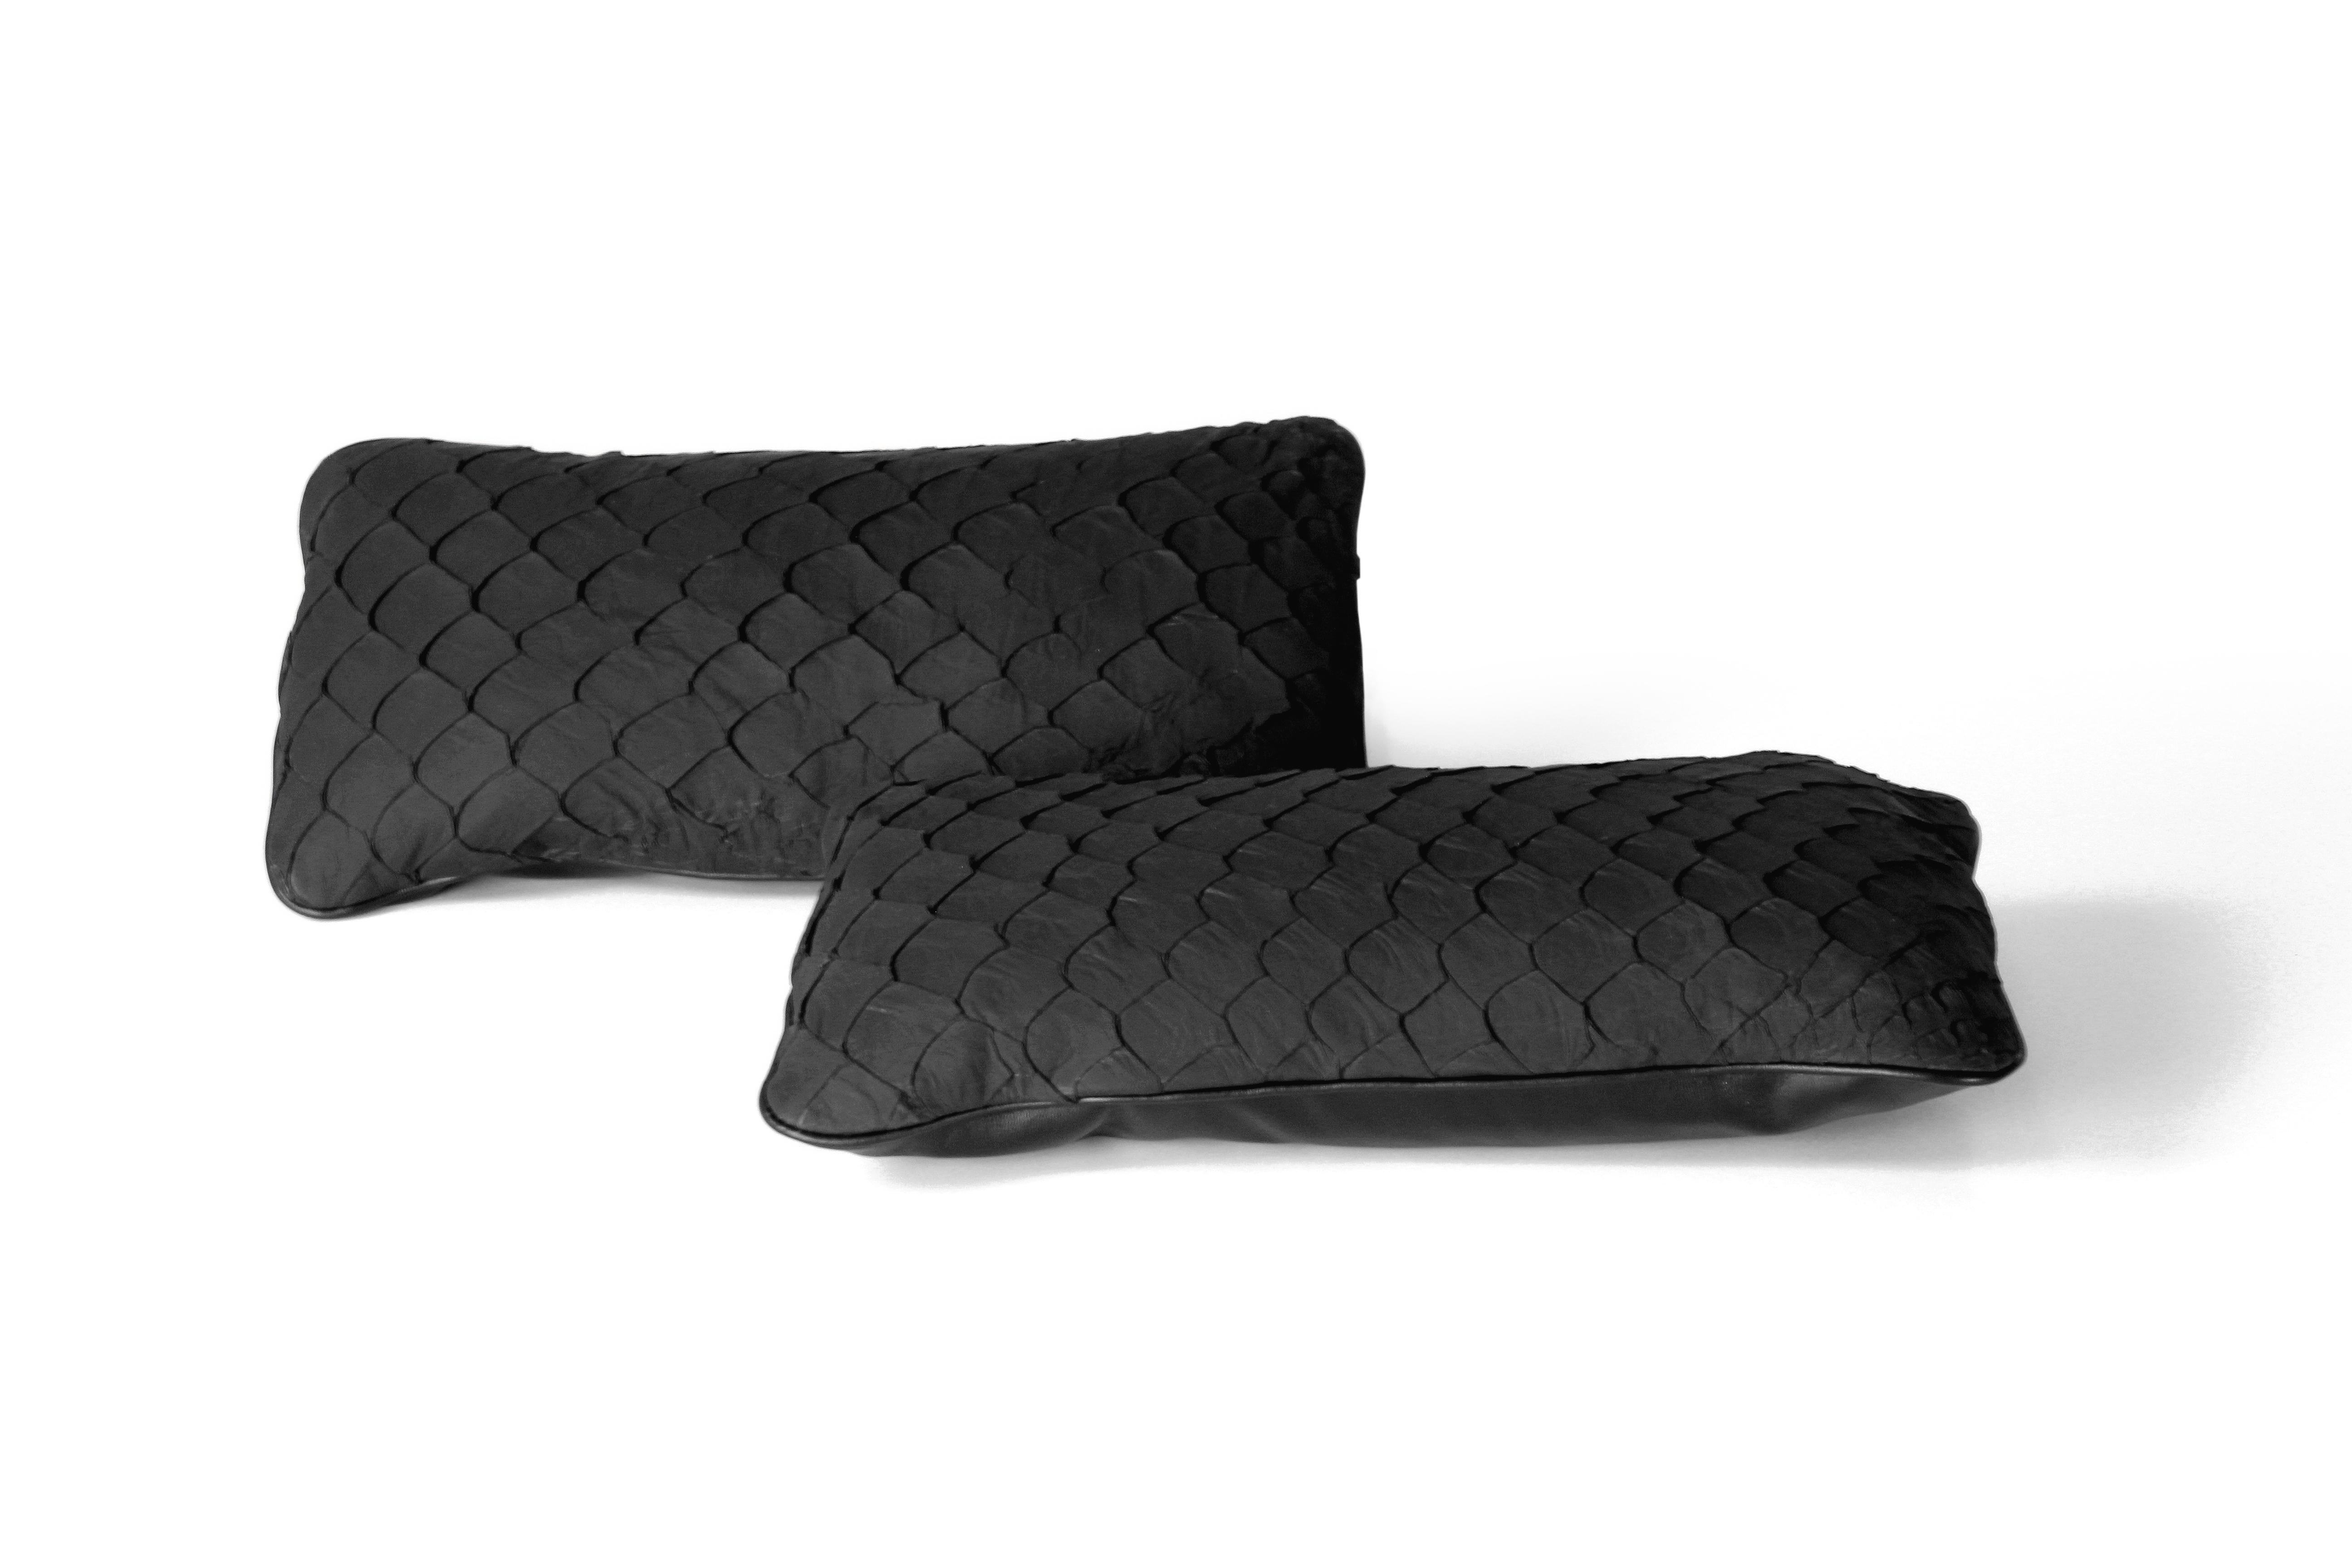 Set of 2 leather cushion, exclusive fish leather black color and black back, small size 15.7 x 7.9 in. Trimmed scales.

Fish leather luxury cushion. Skins used on these cushions comes from Brazilian food industry, it is the second largest river